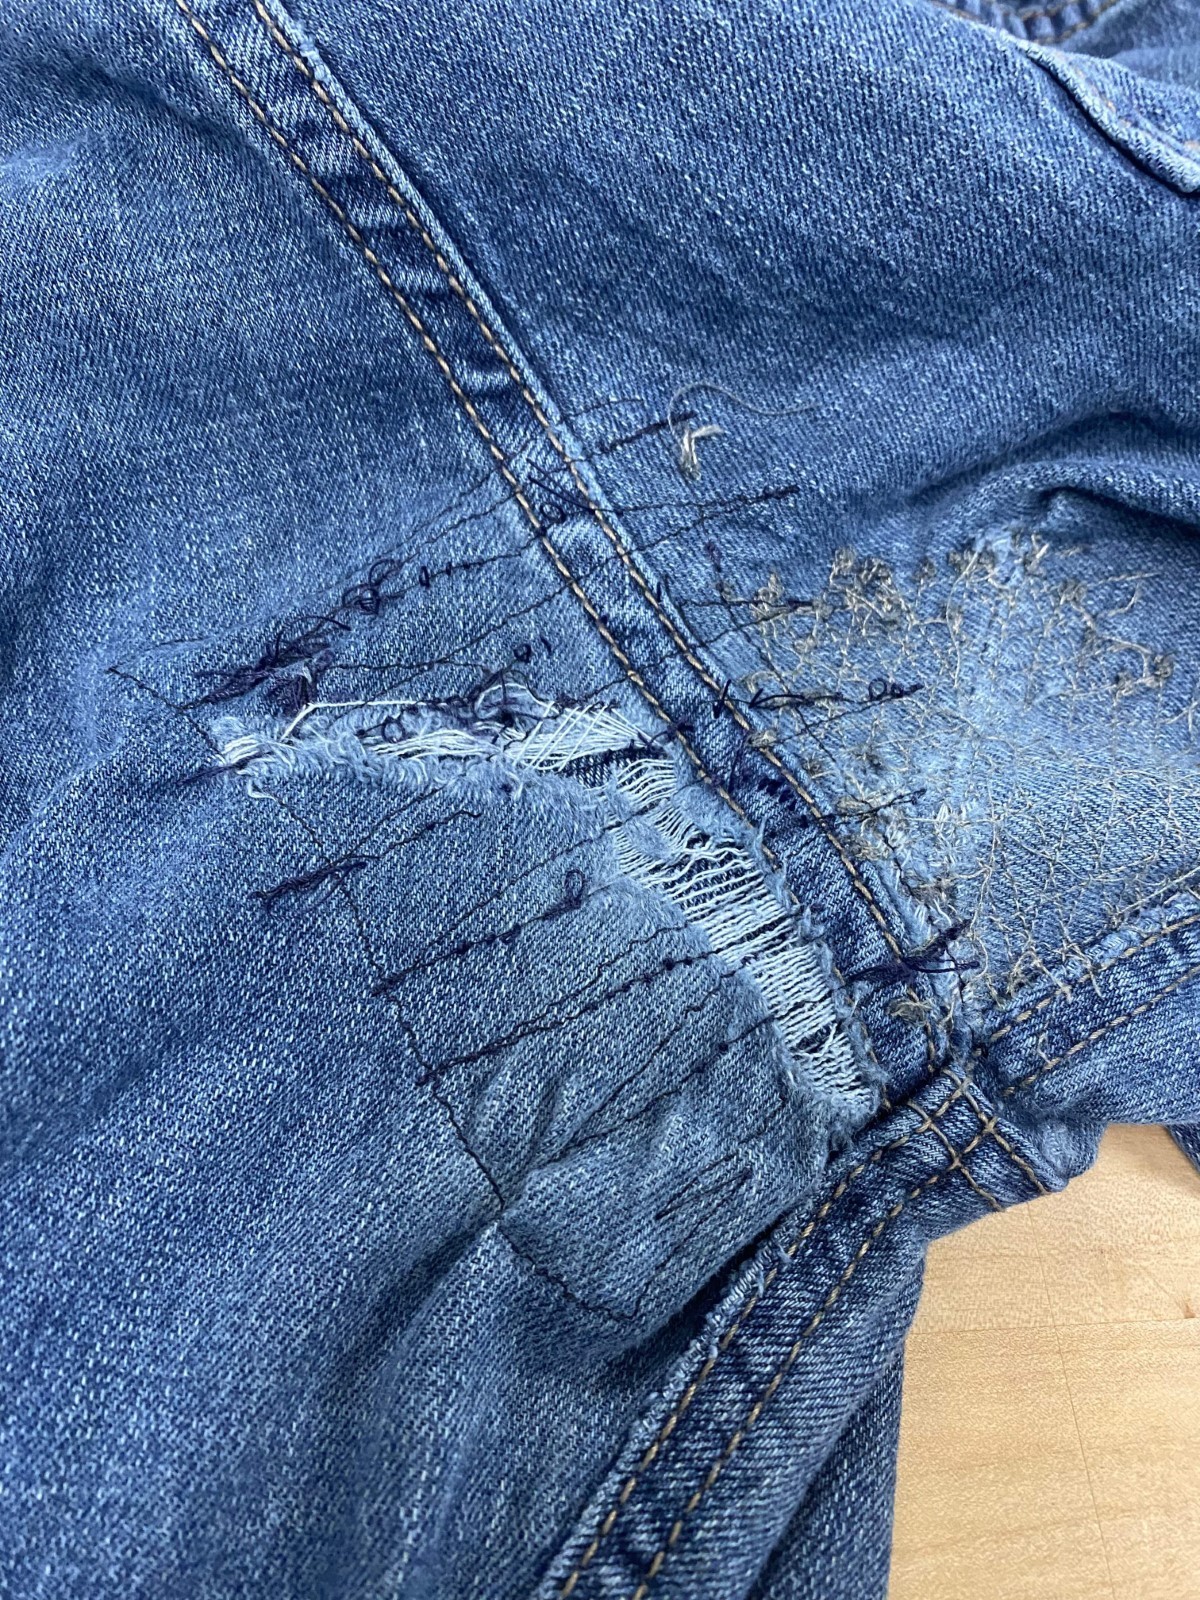 Exterior of jeans with seams across